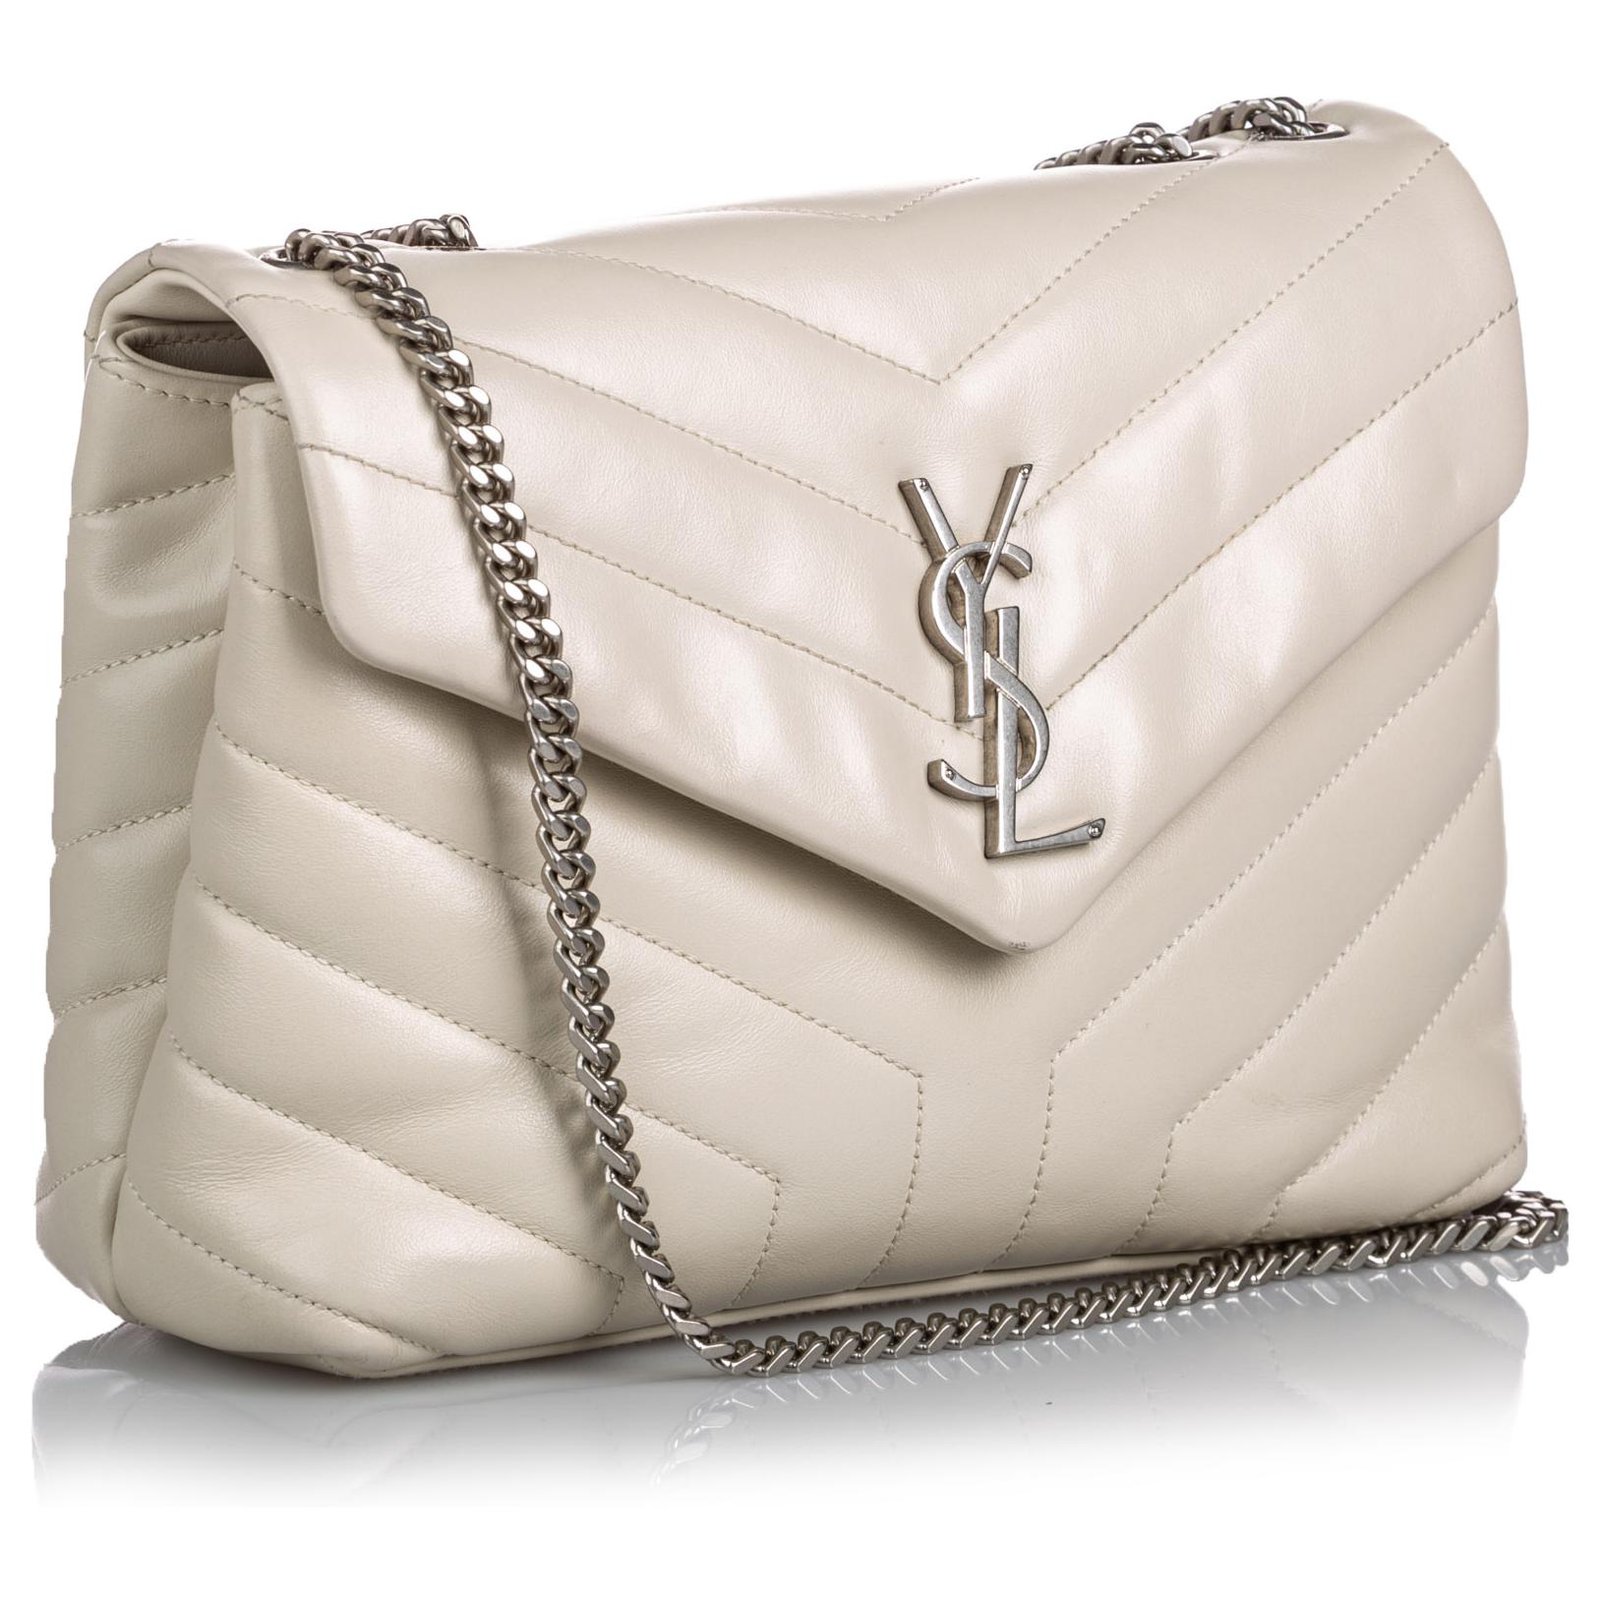 Loulou leather crossbody bag Saint Laurent White in Leather - 37318357